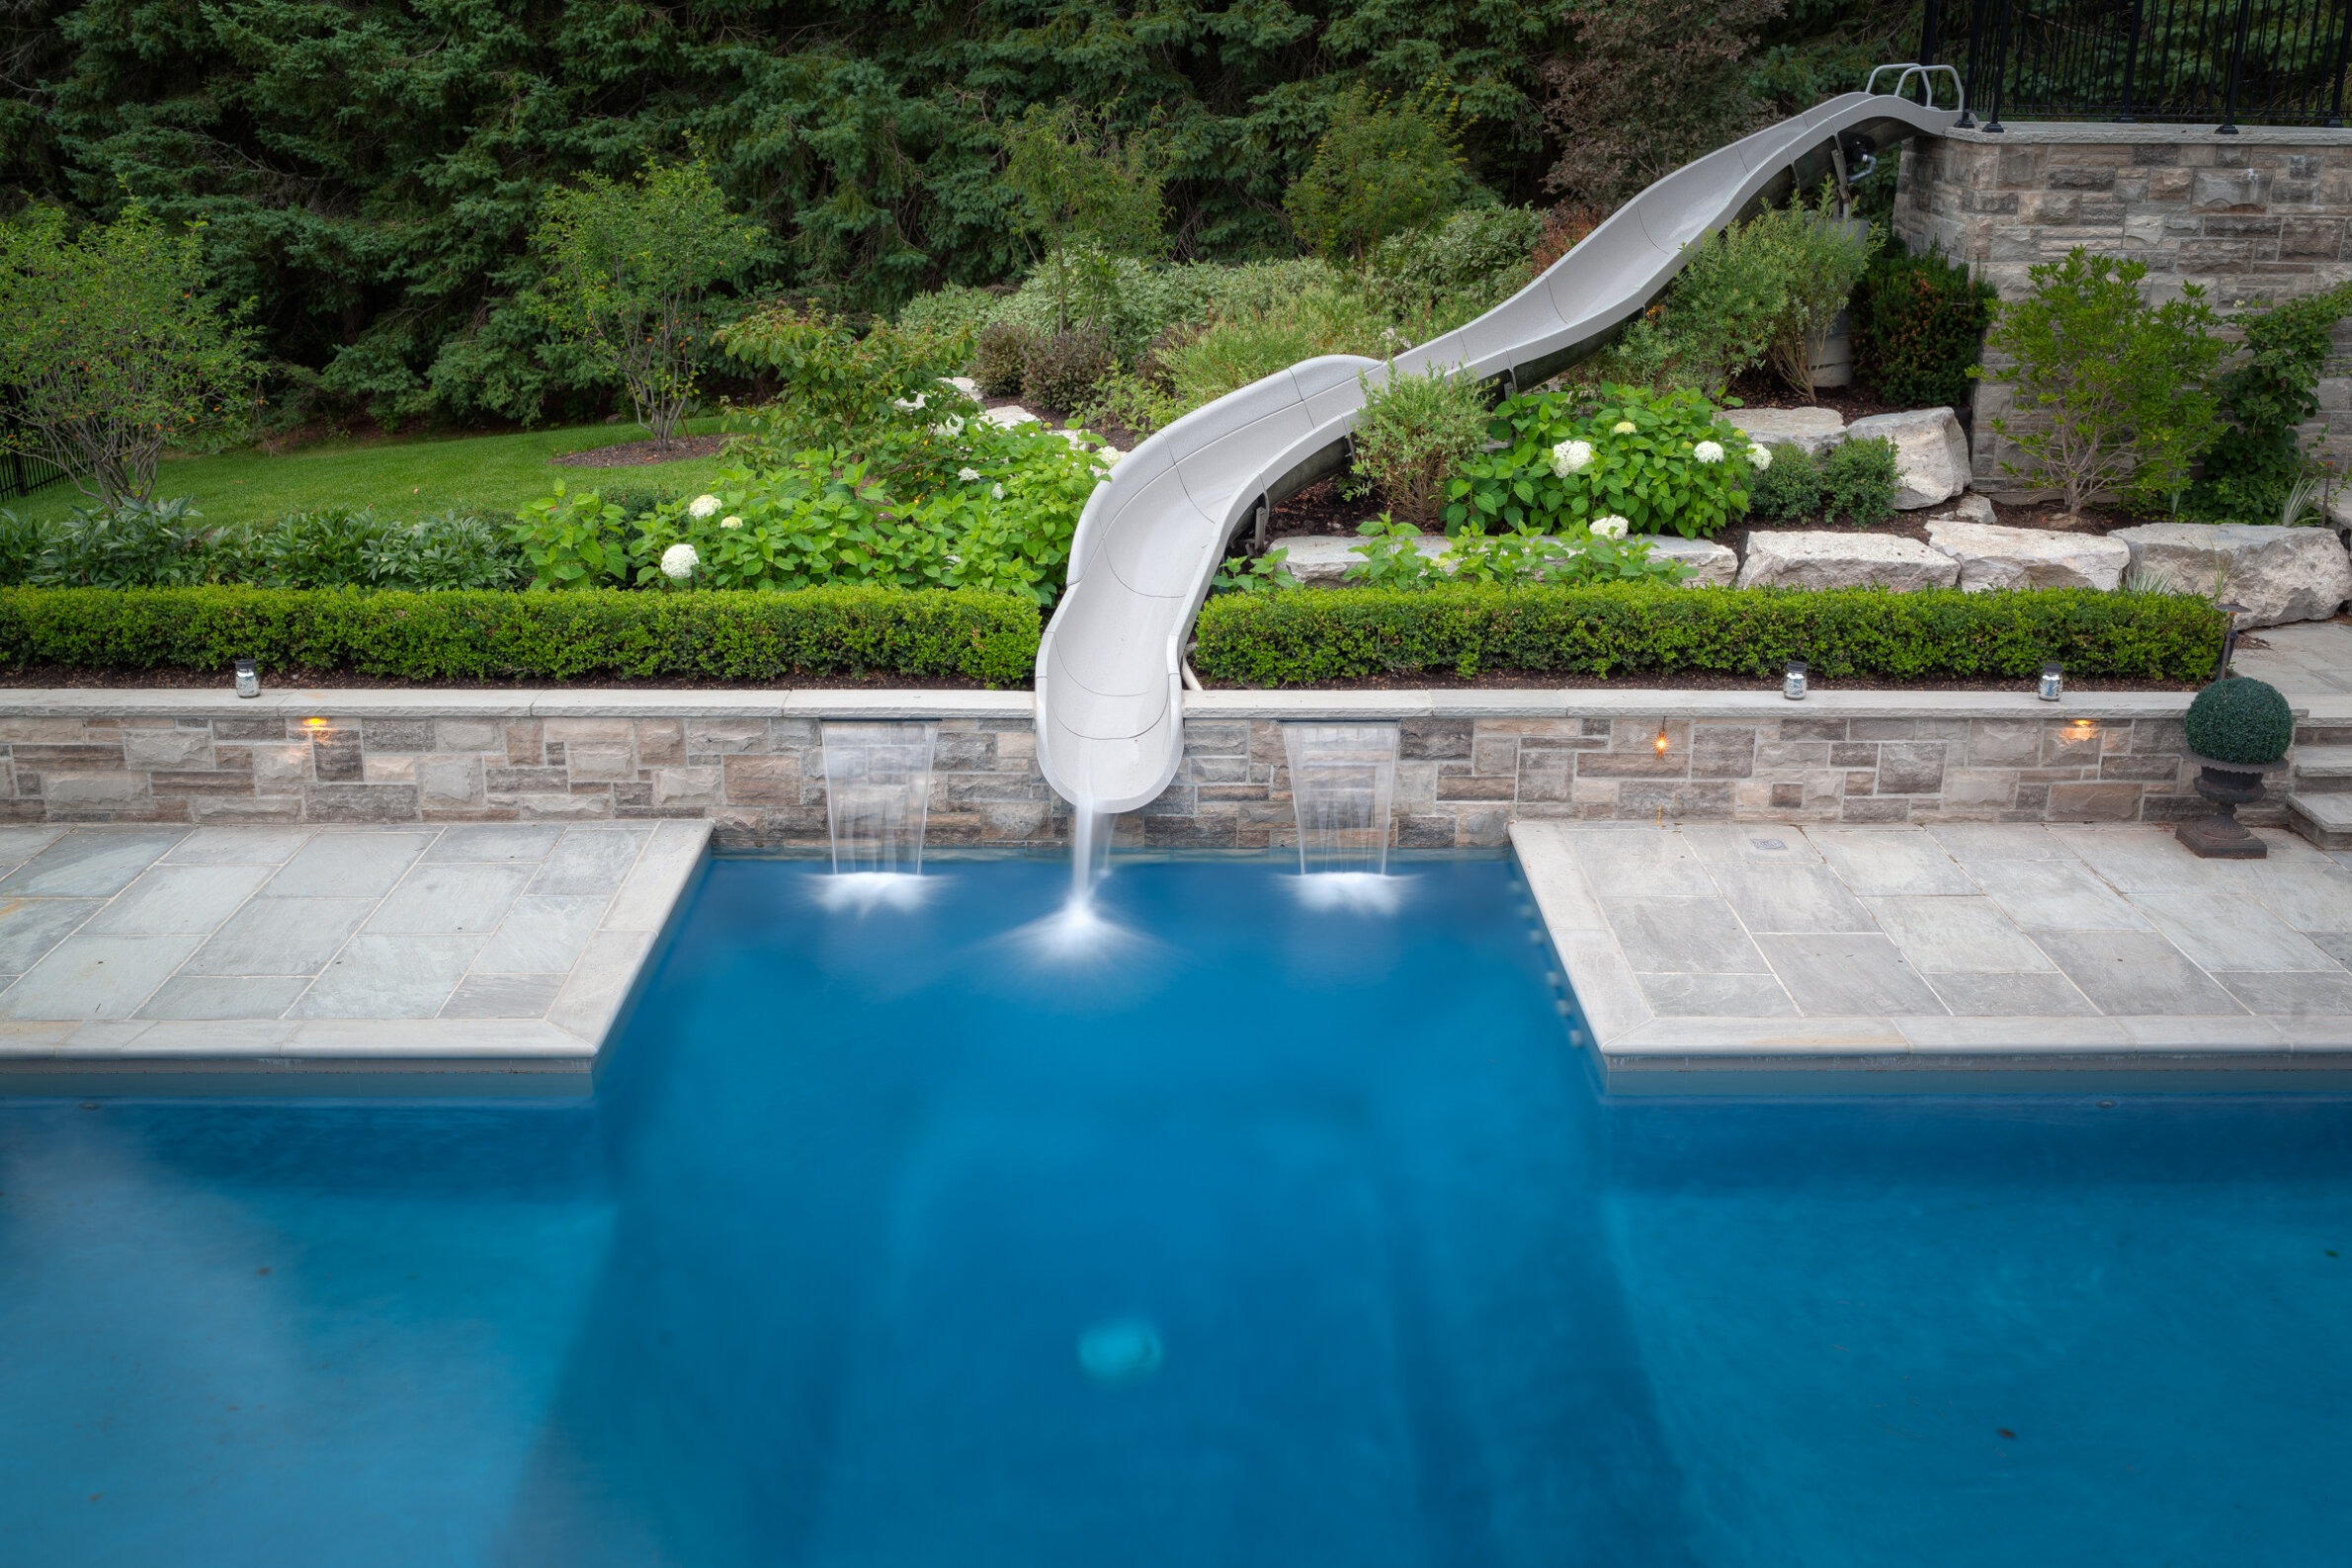 A residential outdoor pool with a curved slide overlooking lush greenery and foliage, featuring stone landscaping and subtle outdoor lighting.